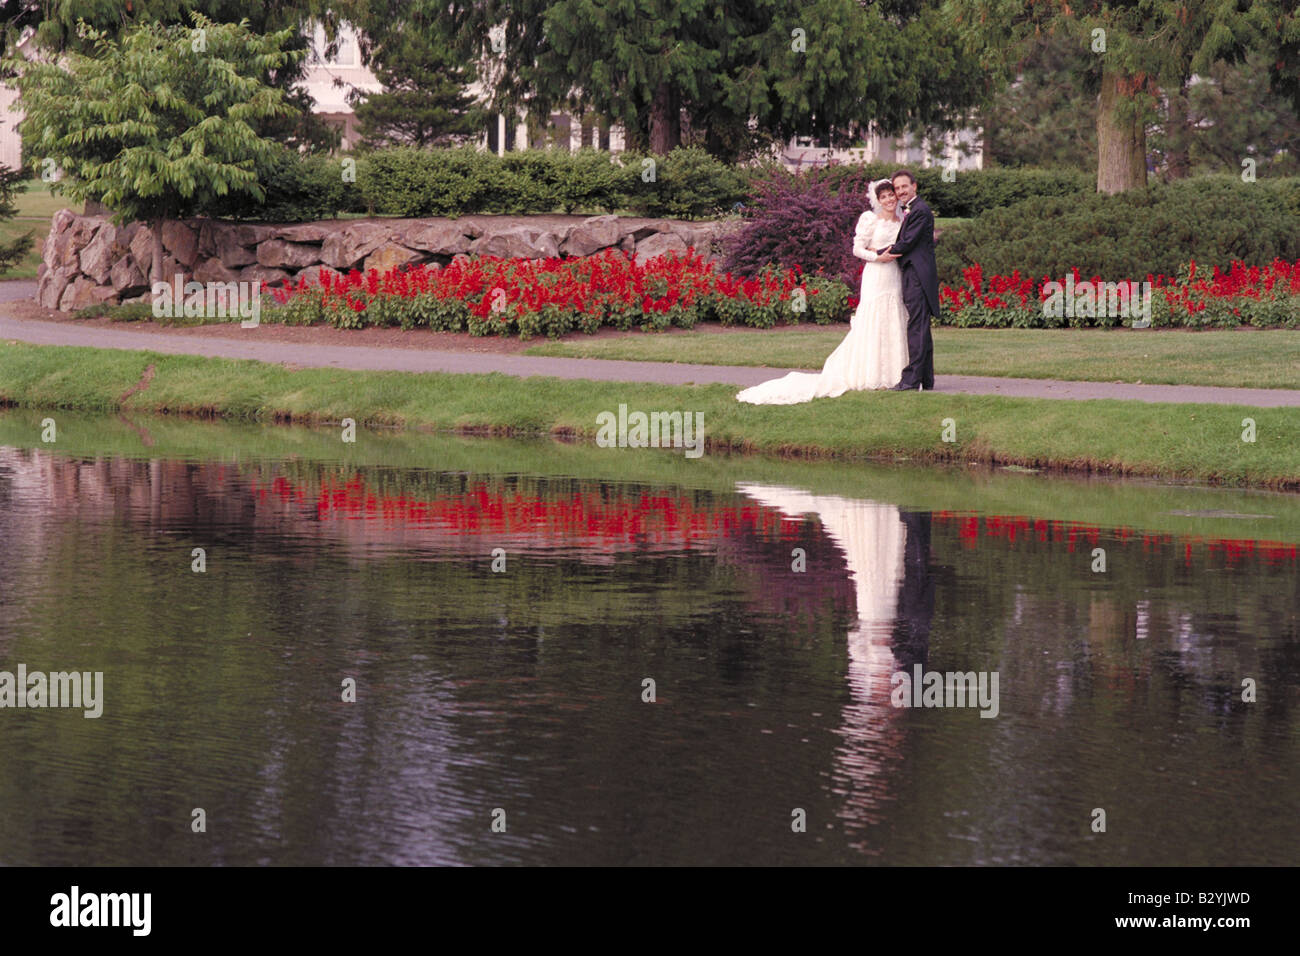 Bride and Groom by lake and Florals Stock Photo